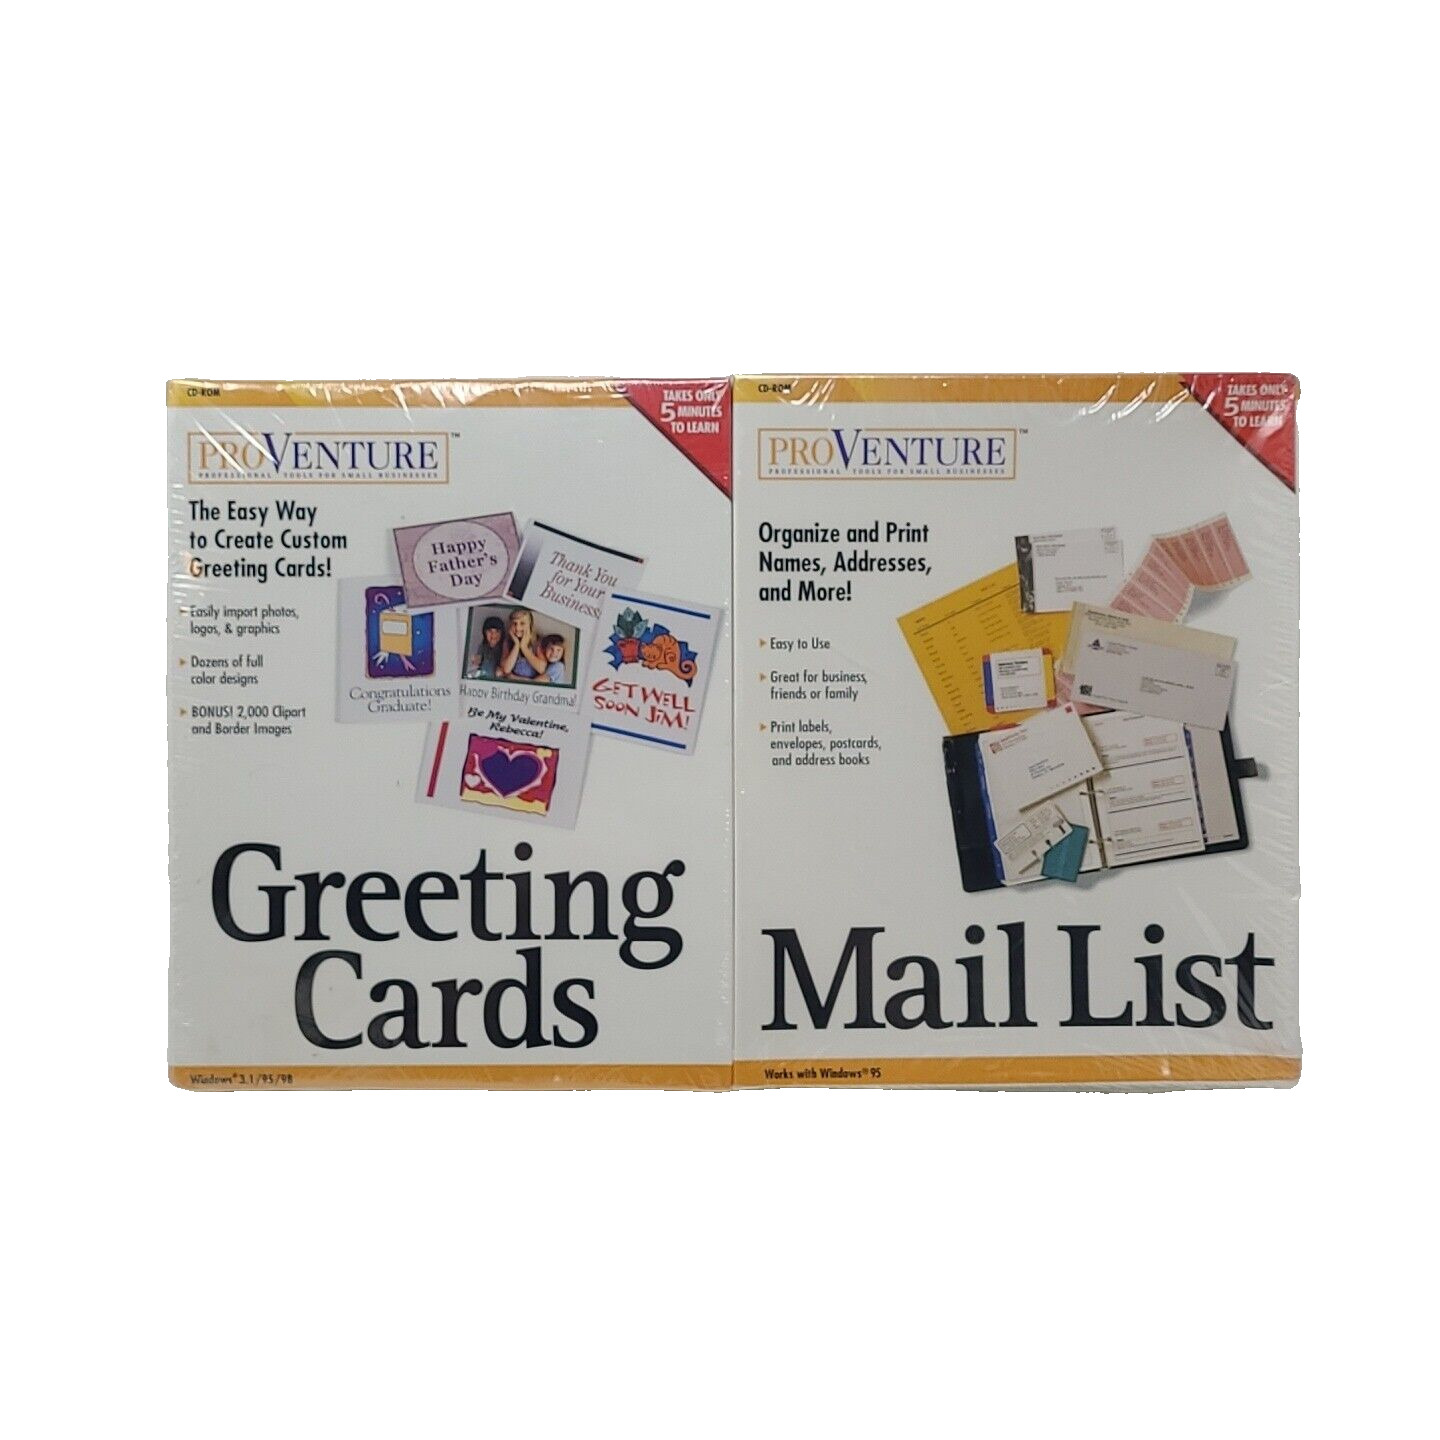 Pro Venture CD-Rom Set Greeting Cards Resumes Mail List Set of 4 New and Sealed